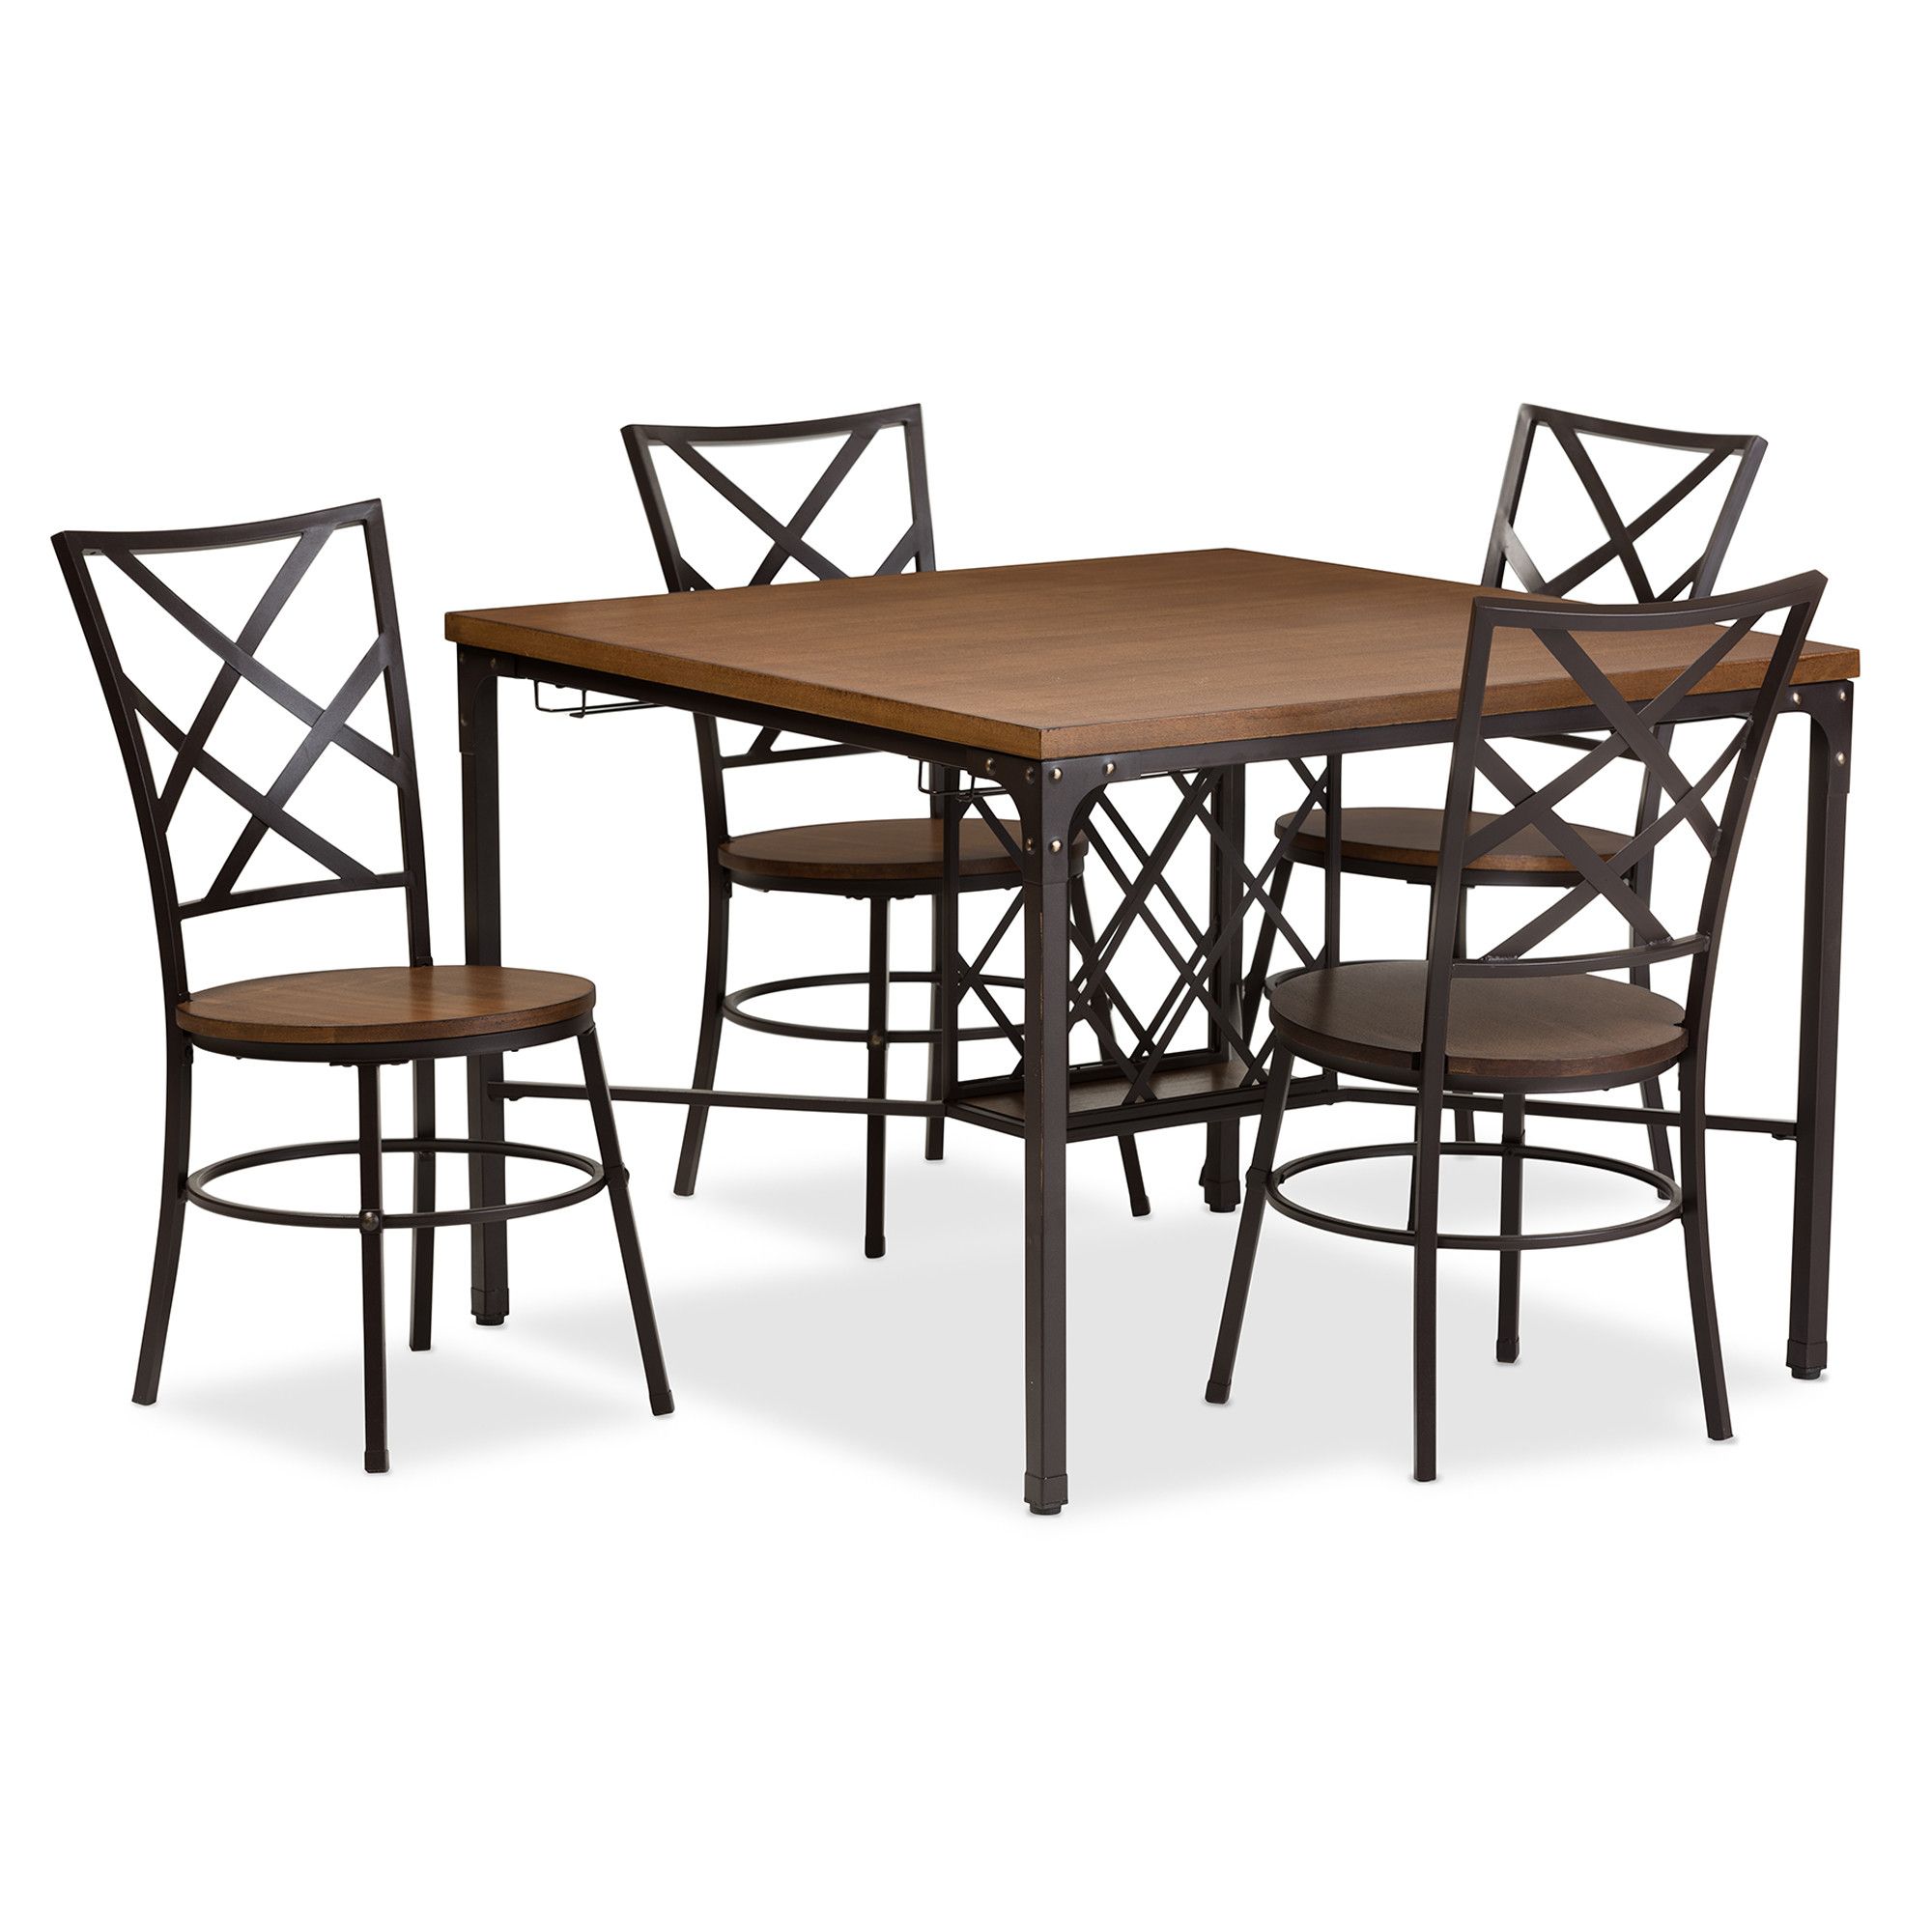 Wholesale Dining Sets. Room Pier One (View 11 of 20)